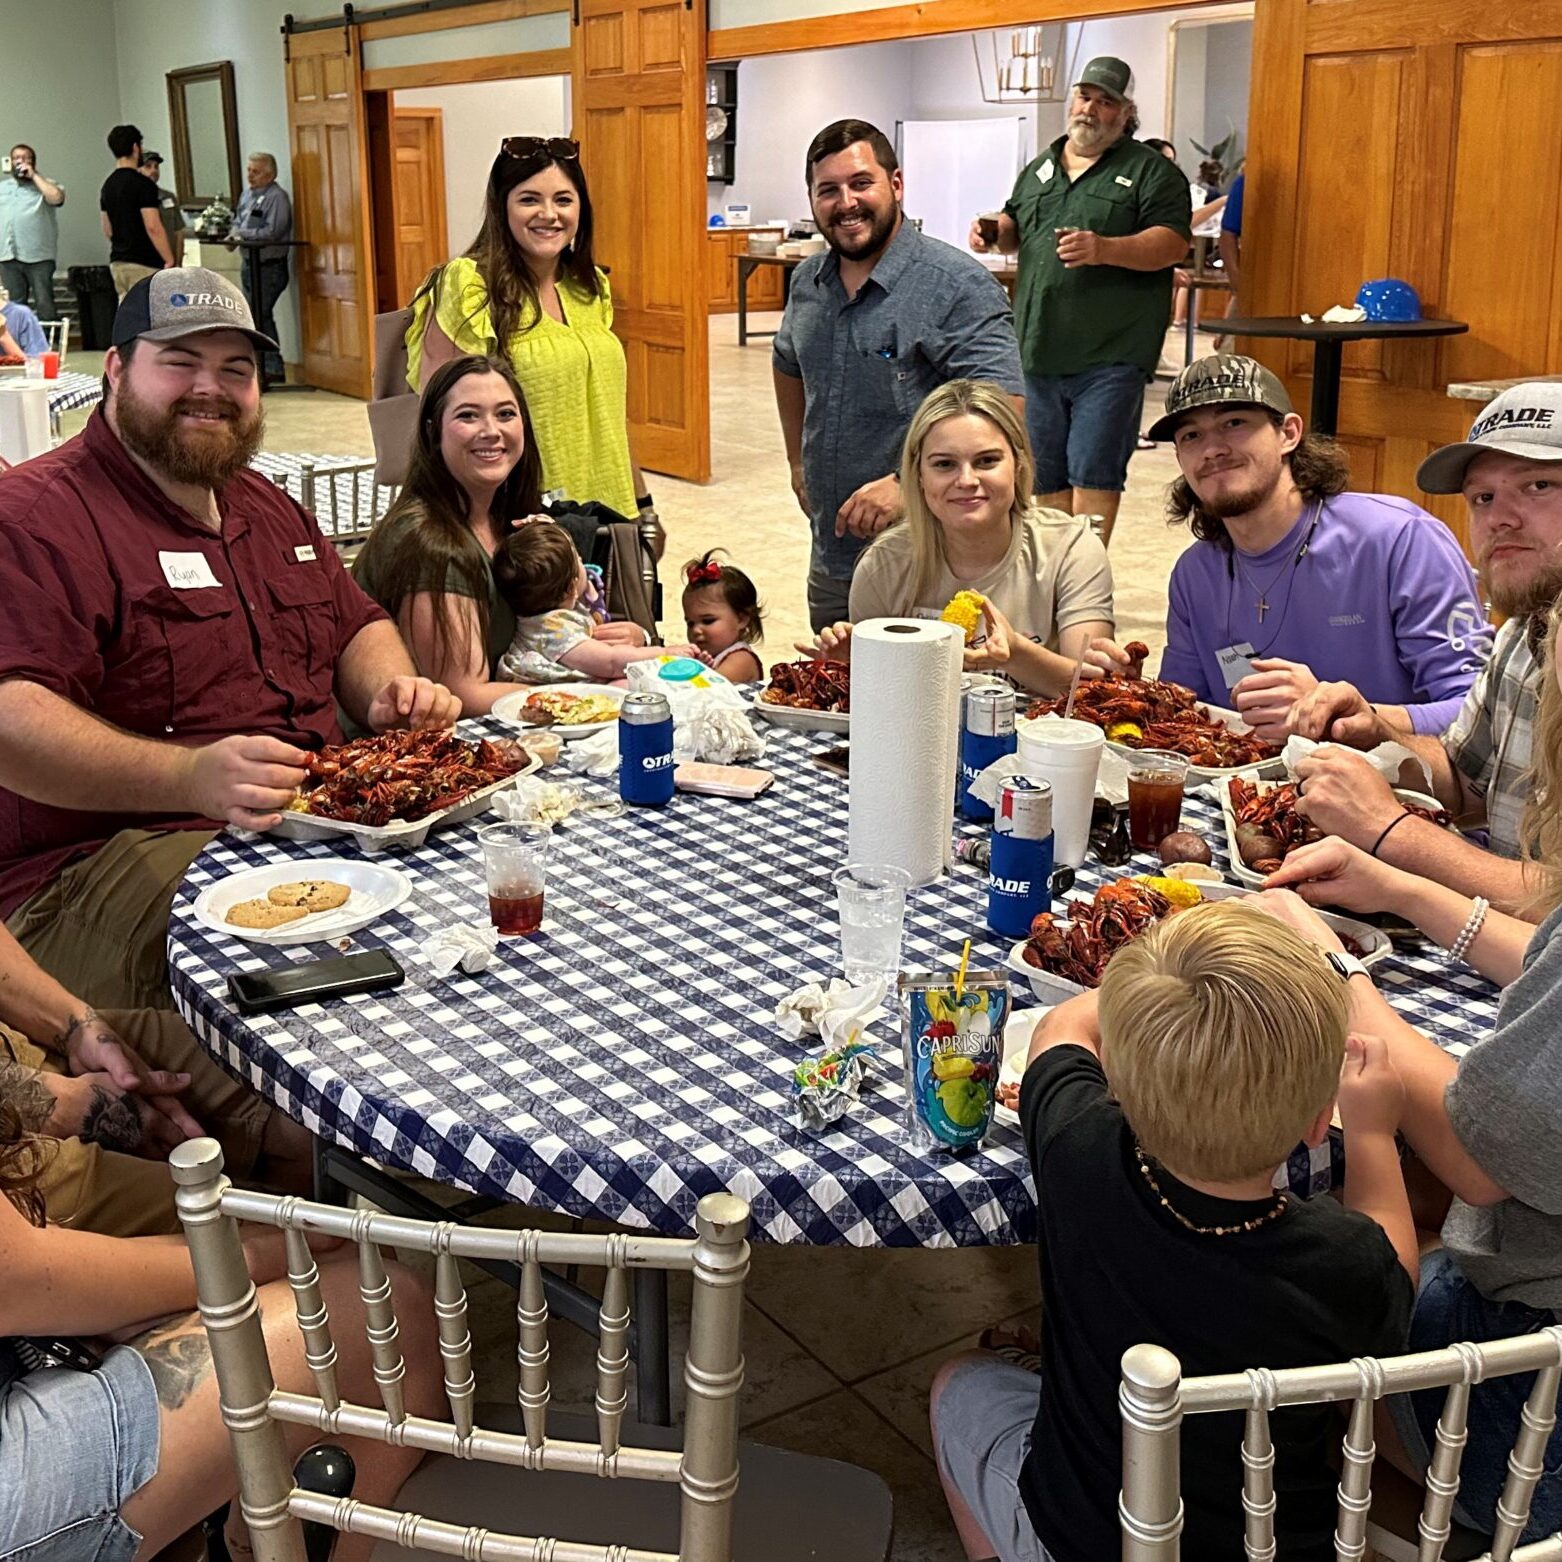 Trade employees and their families at a crawfish boil